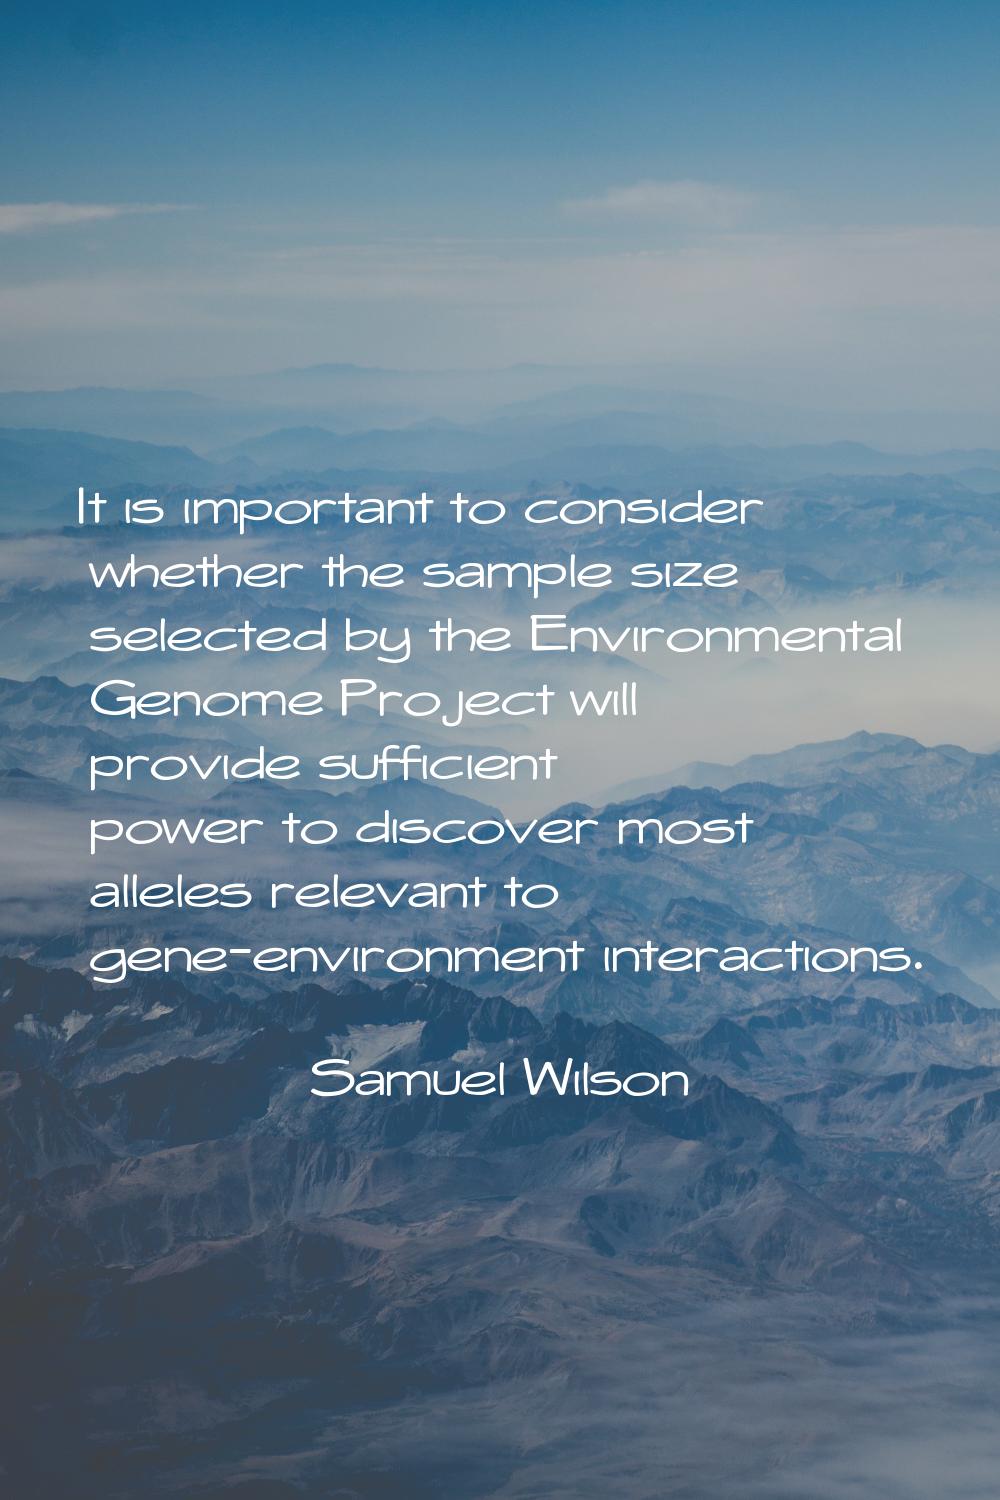 It is important to consider whether the sample size selected by the Environmental Genome Project wi